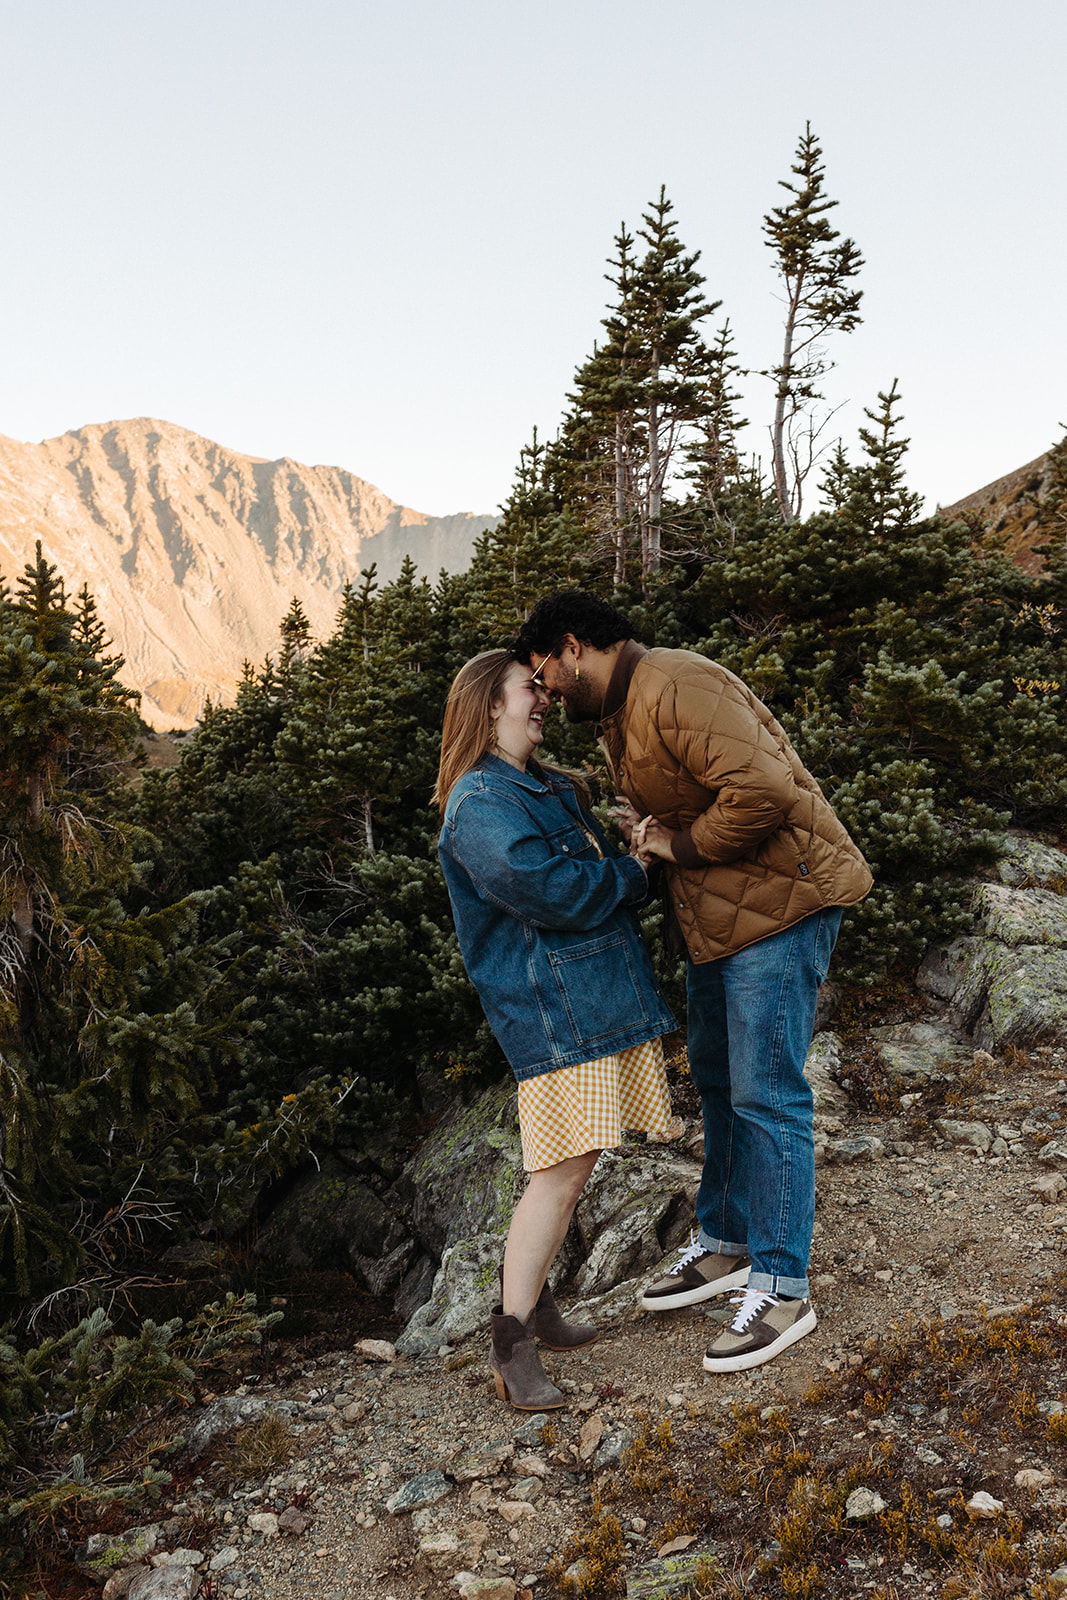 The couple smile and laugh while touching foreheads amongst the spruce trees and rocky trails.